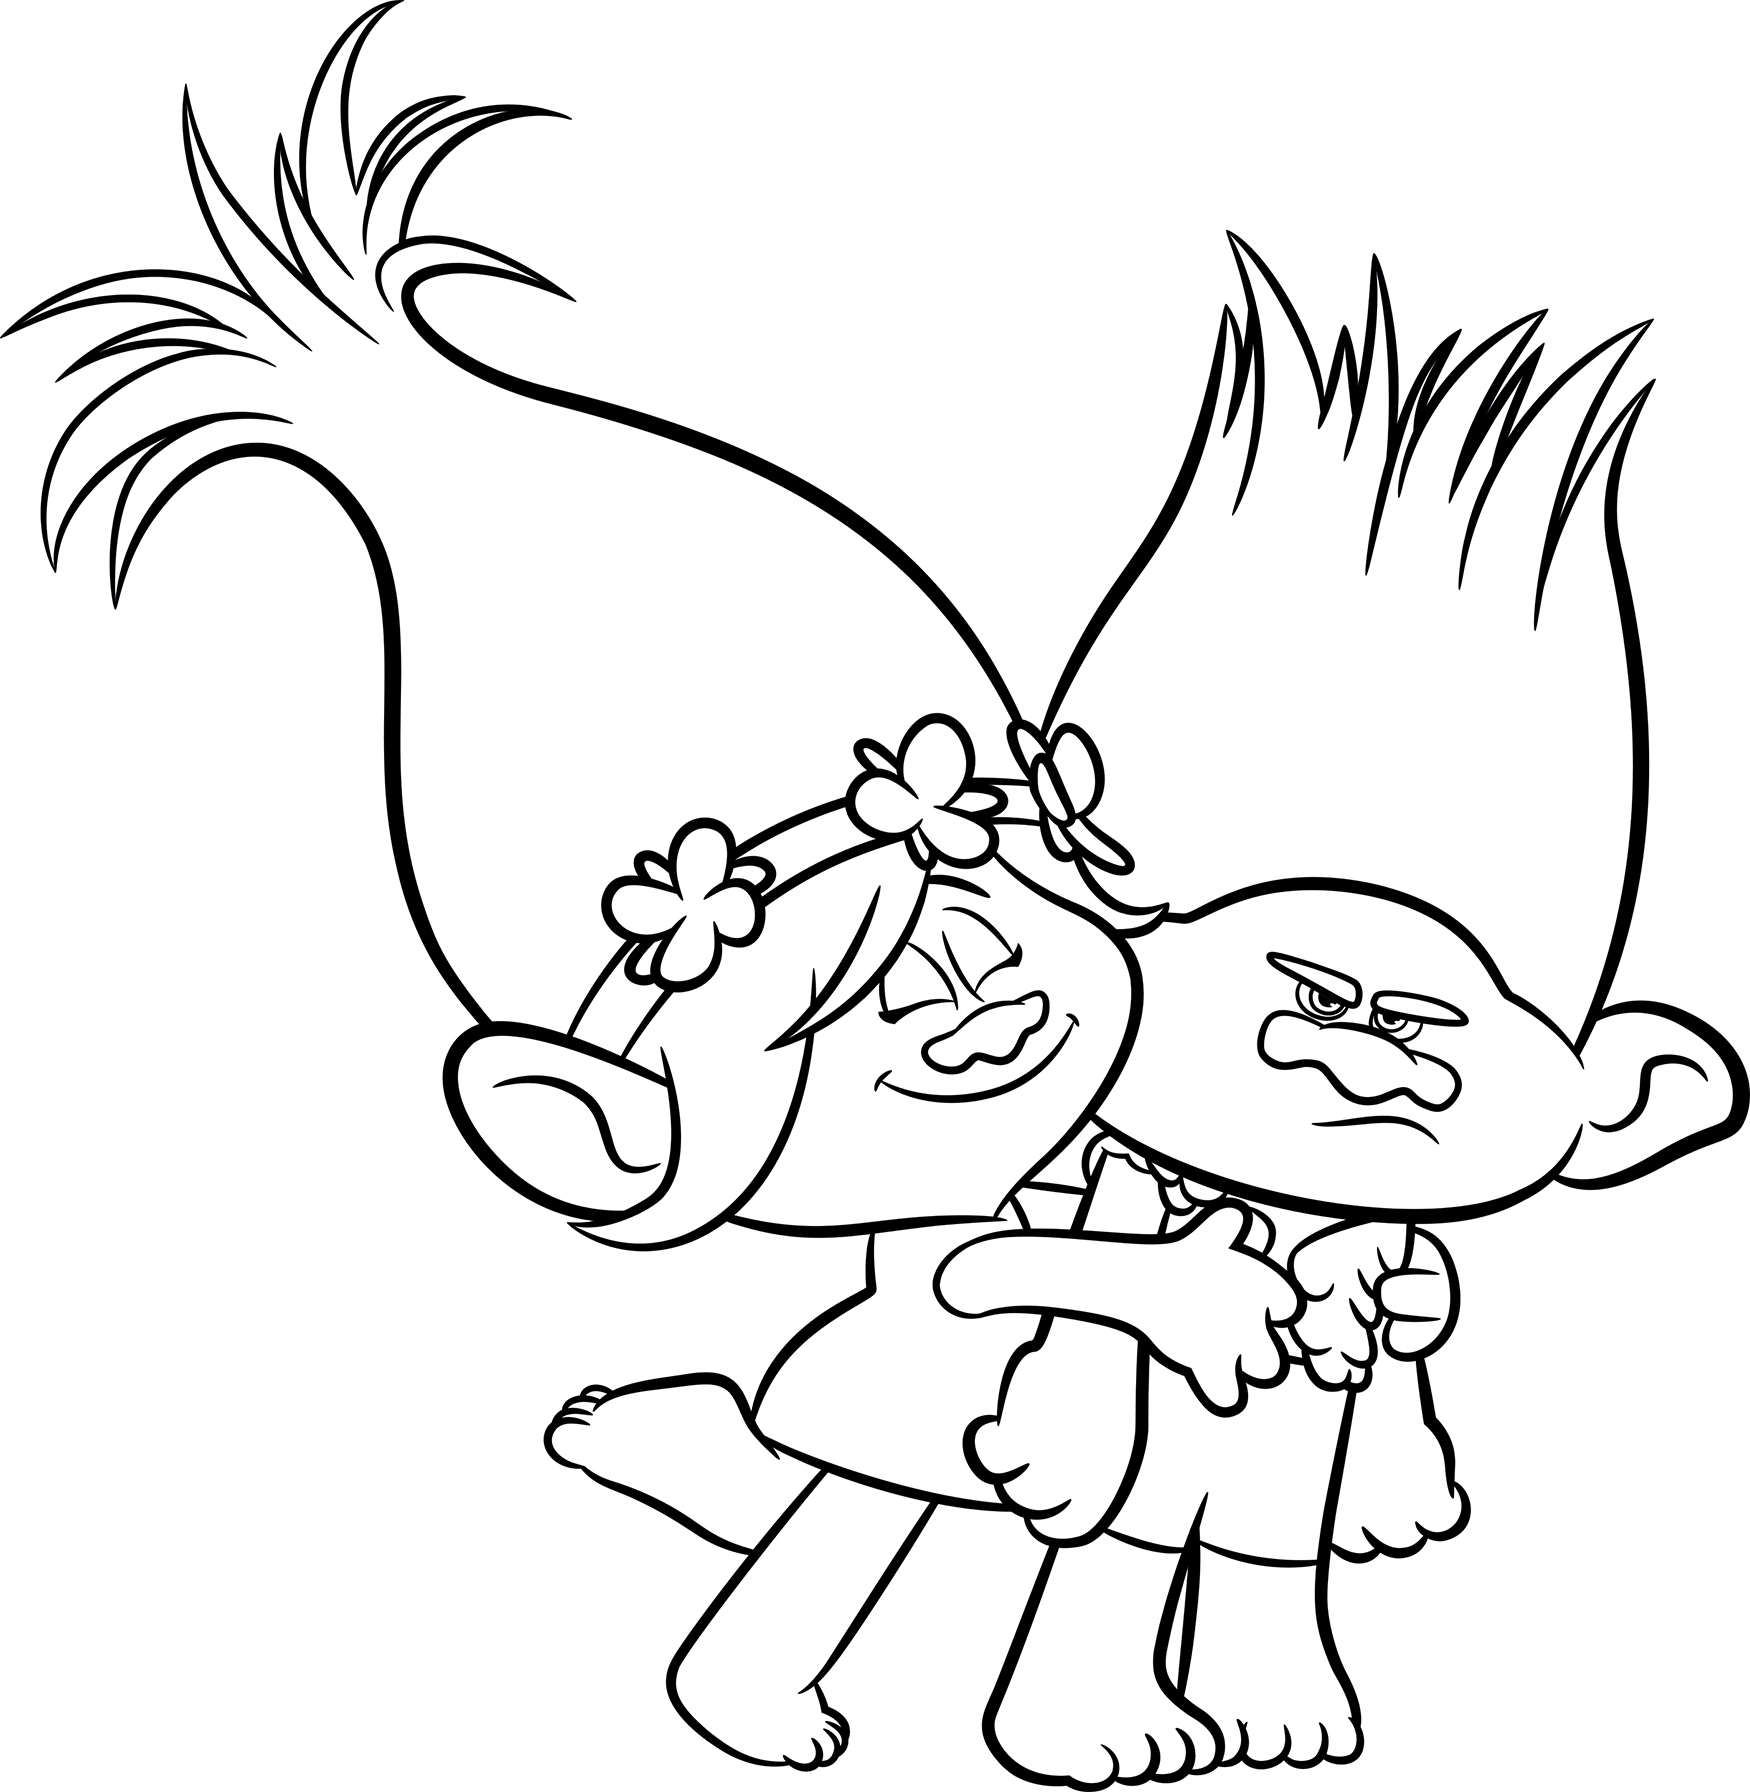 Free Dreamworks Trolls Coloring Pages at GetDrawings | Free download